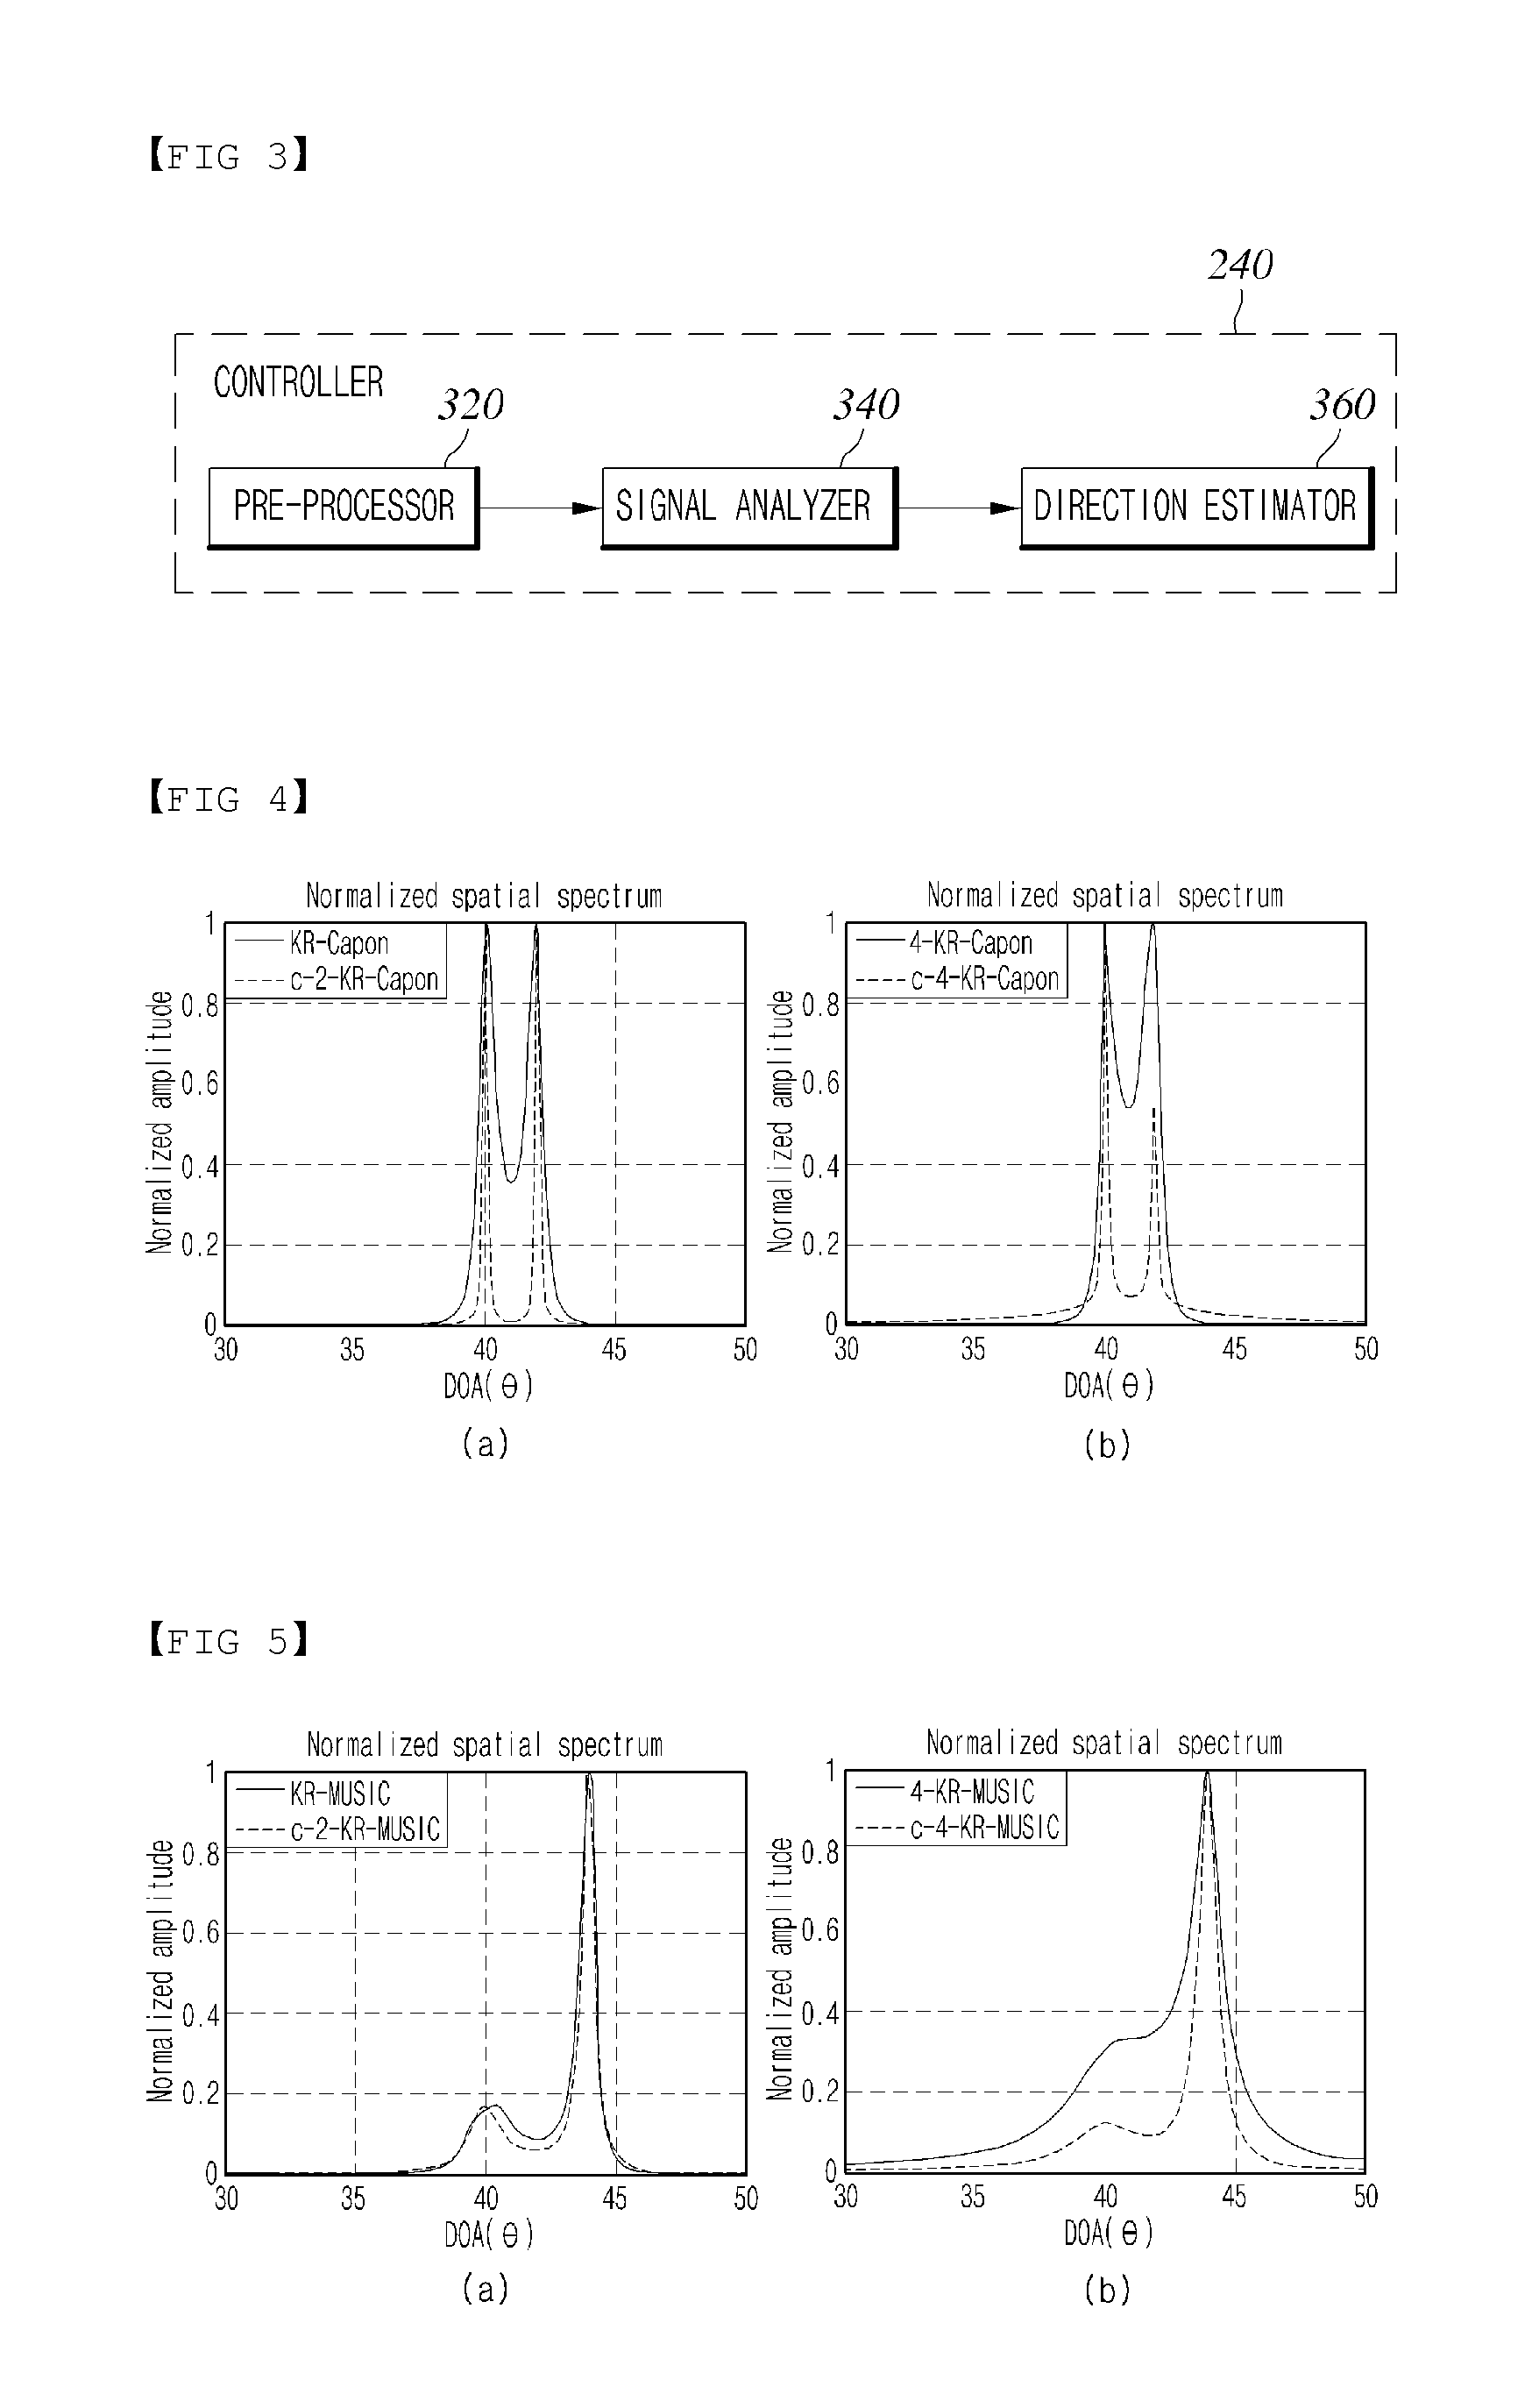 Direction of Arrival (DOA) Estimation Device and Method